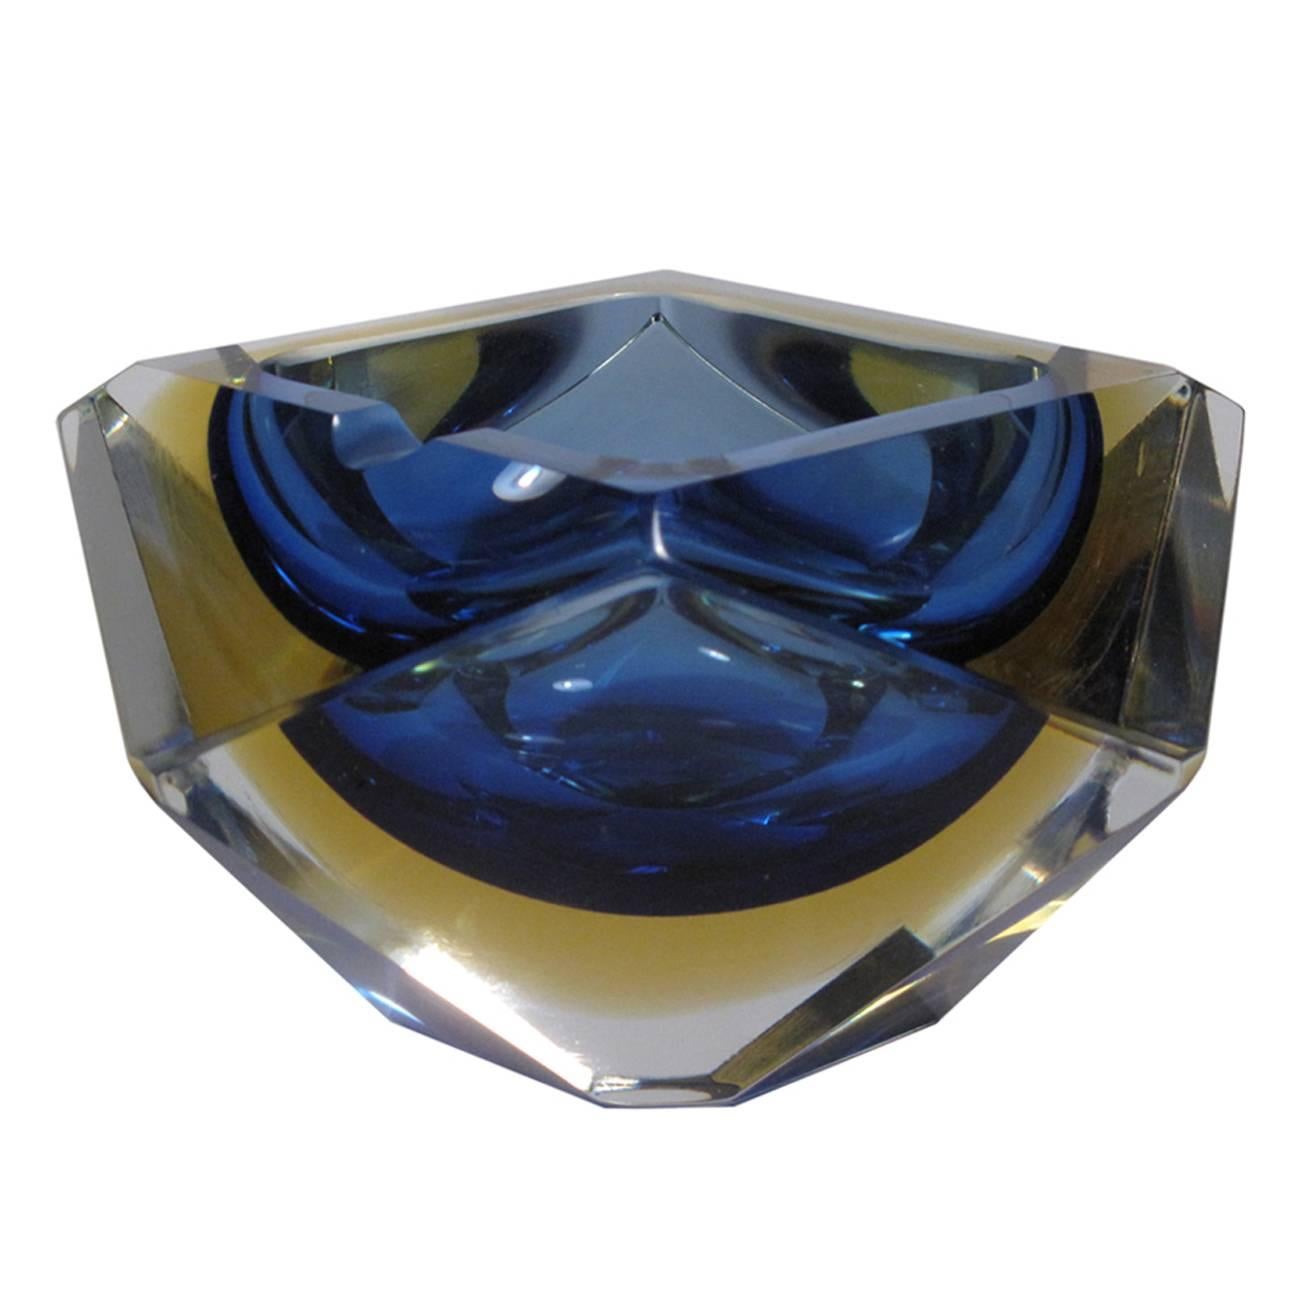 A multifaceted Sommerso Murano bowl/ashtray by Mandruzzato. Layers of blue and yellow are encased in clear glass in this sculptural piece.